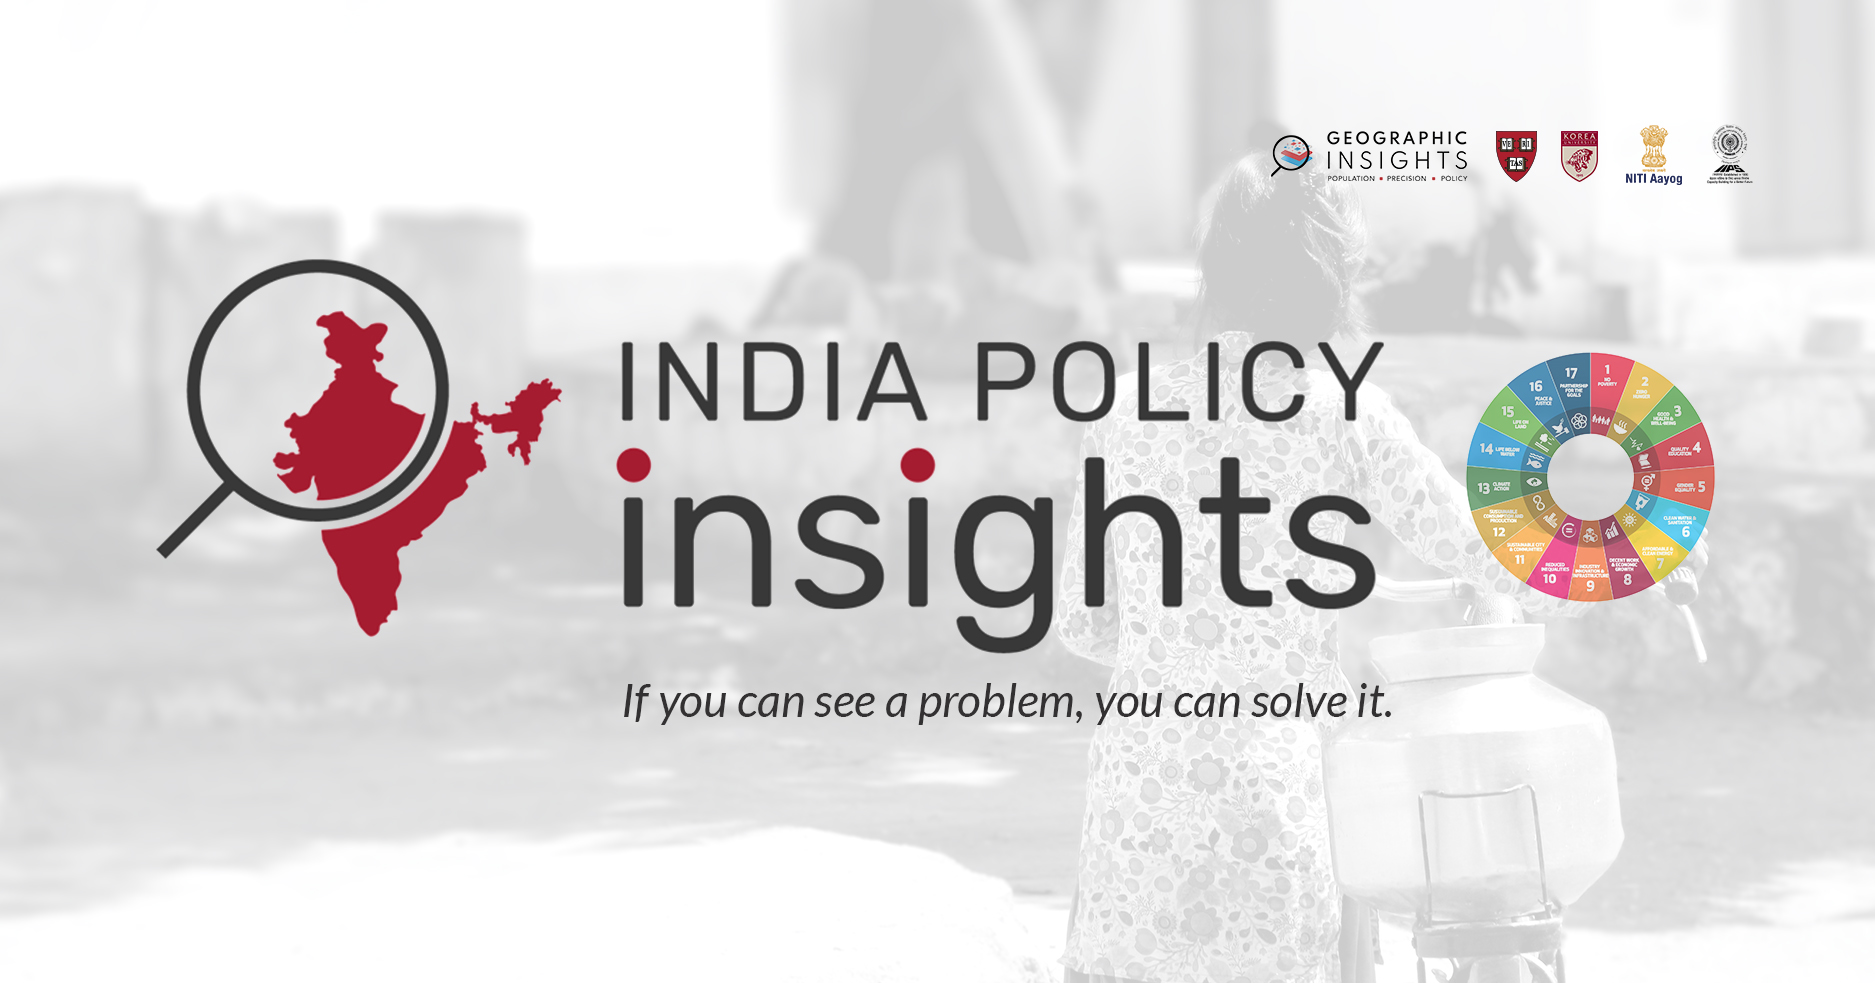 India Policy Insights